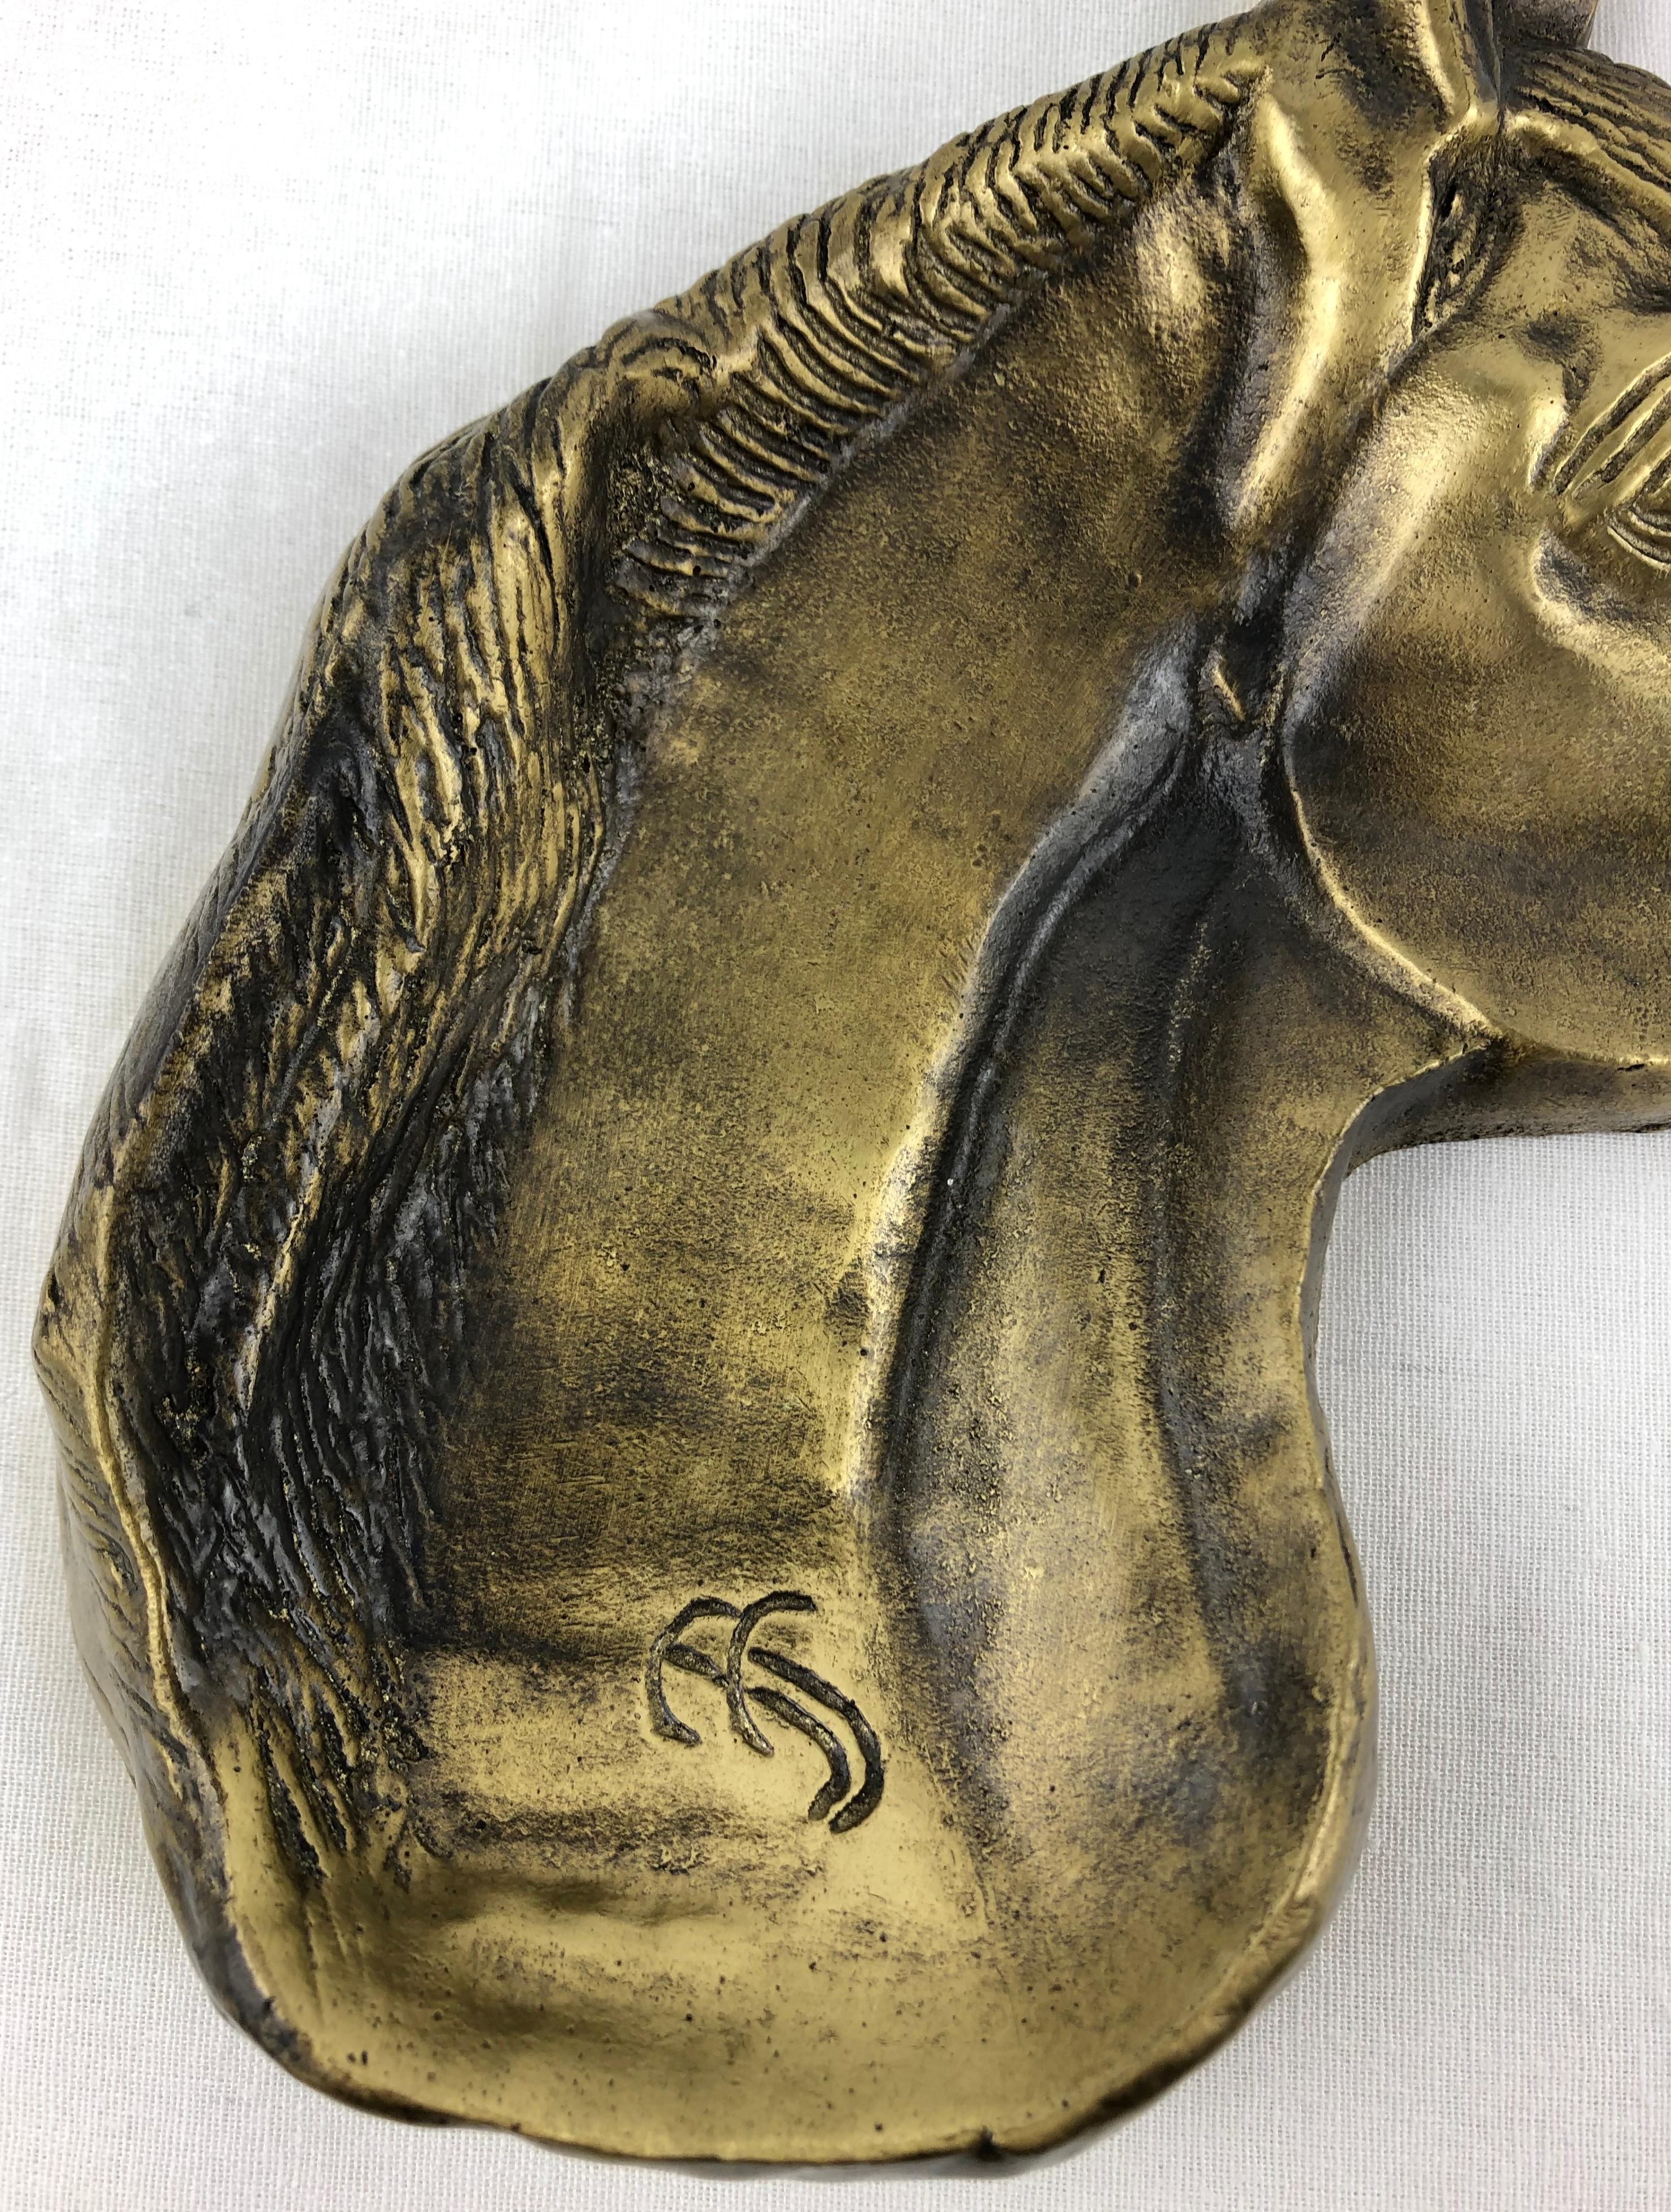 Hand-Crafted Sculpted Bronze Horse Head Key Holder or Vide Poche, Signed For Sale